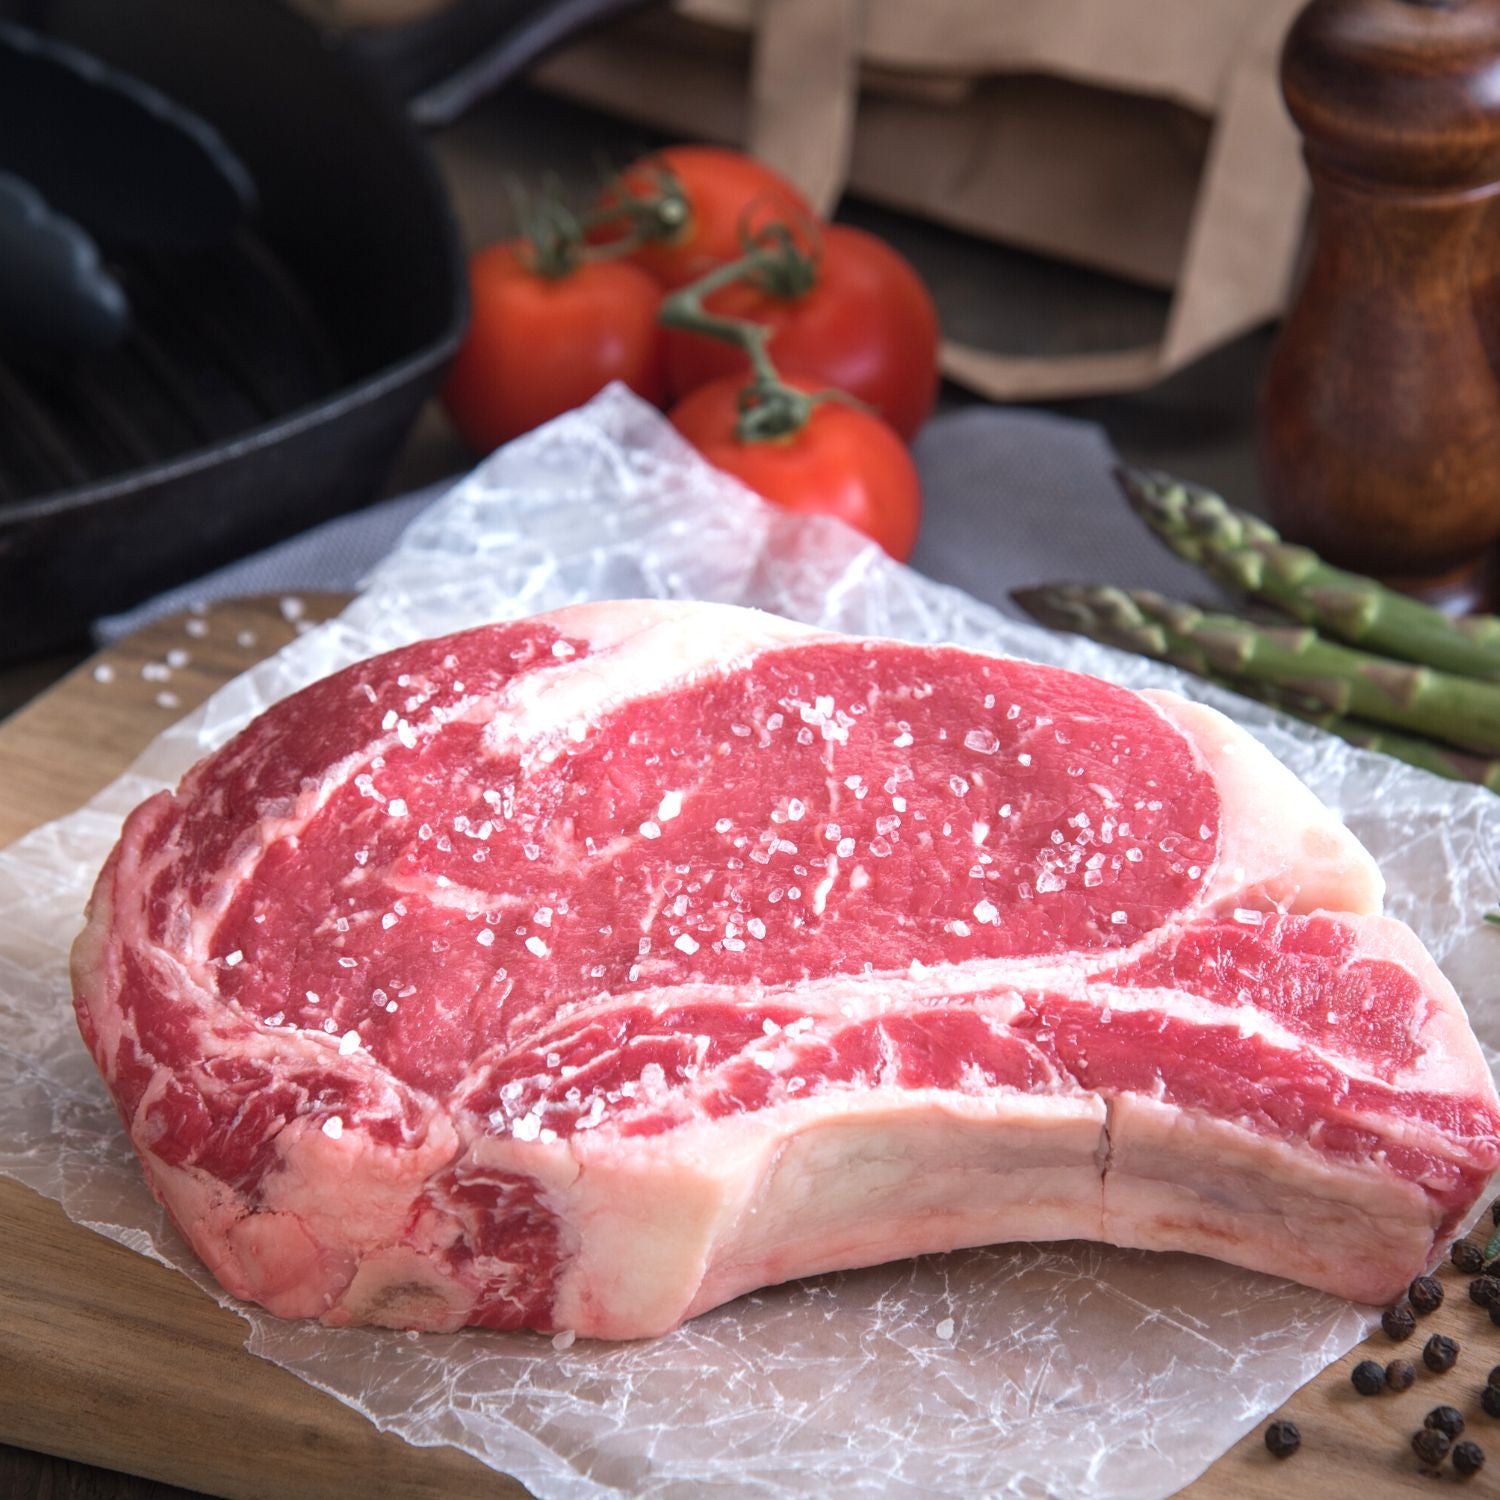 Raw steak, high-quality meat with marbling throughout